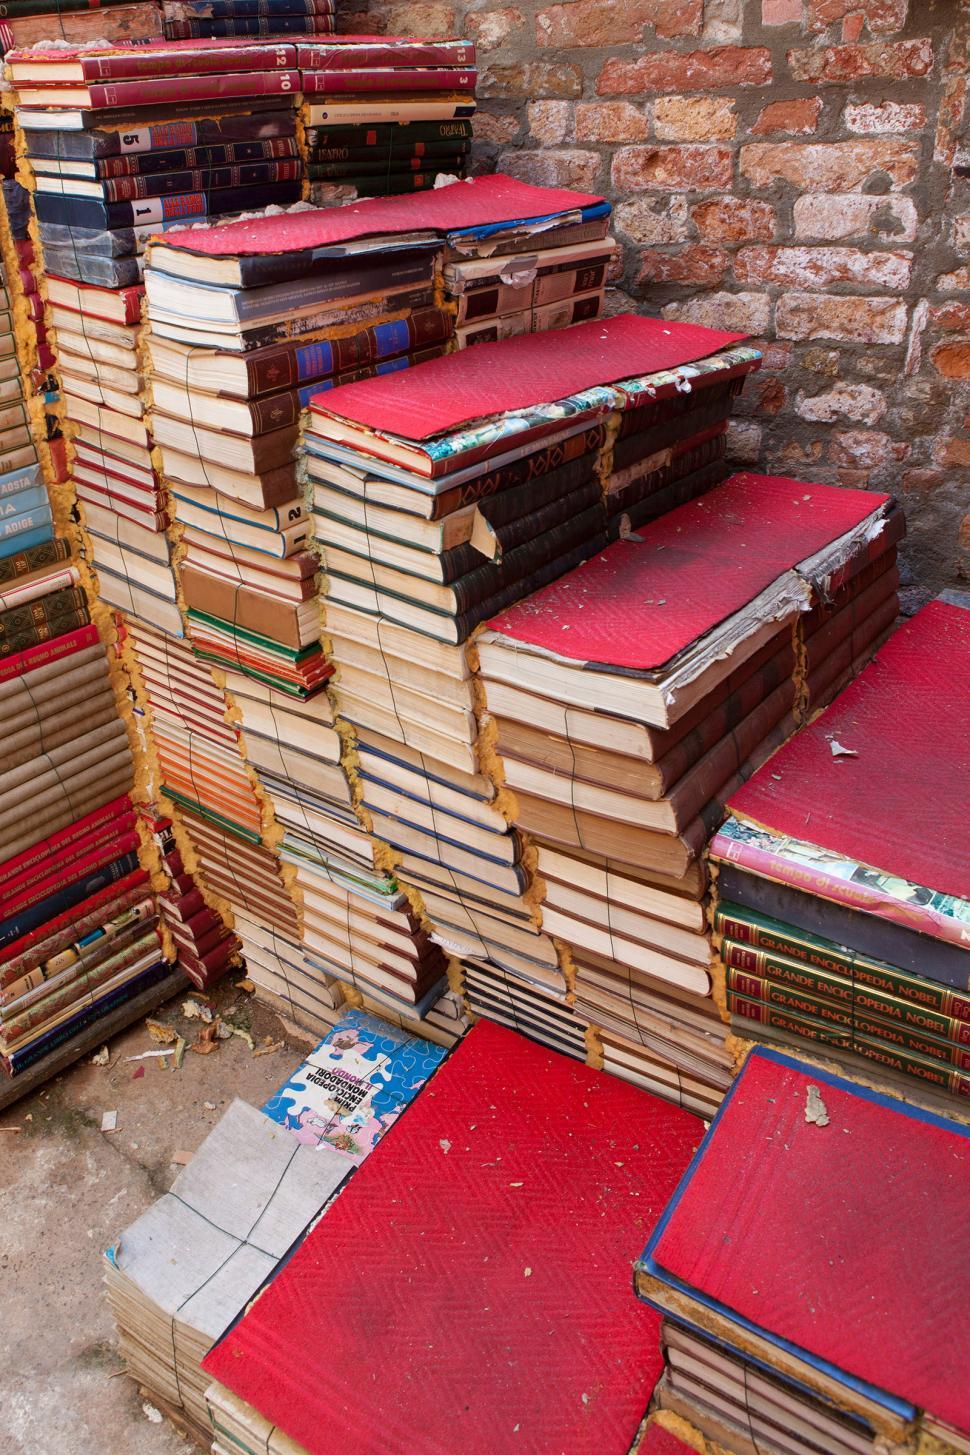 Free Image of Stacks of Books 